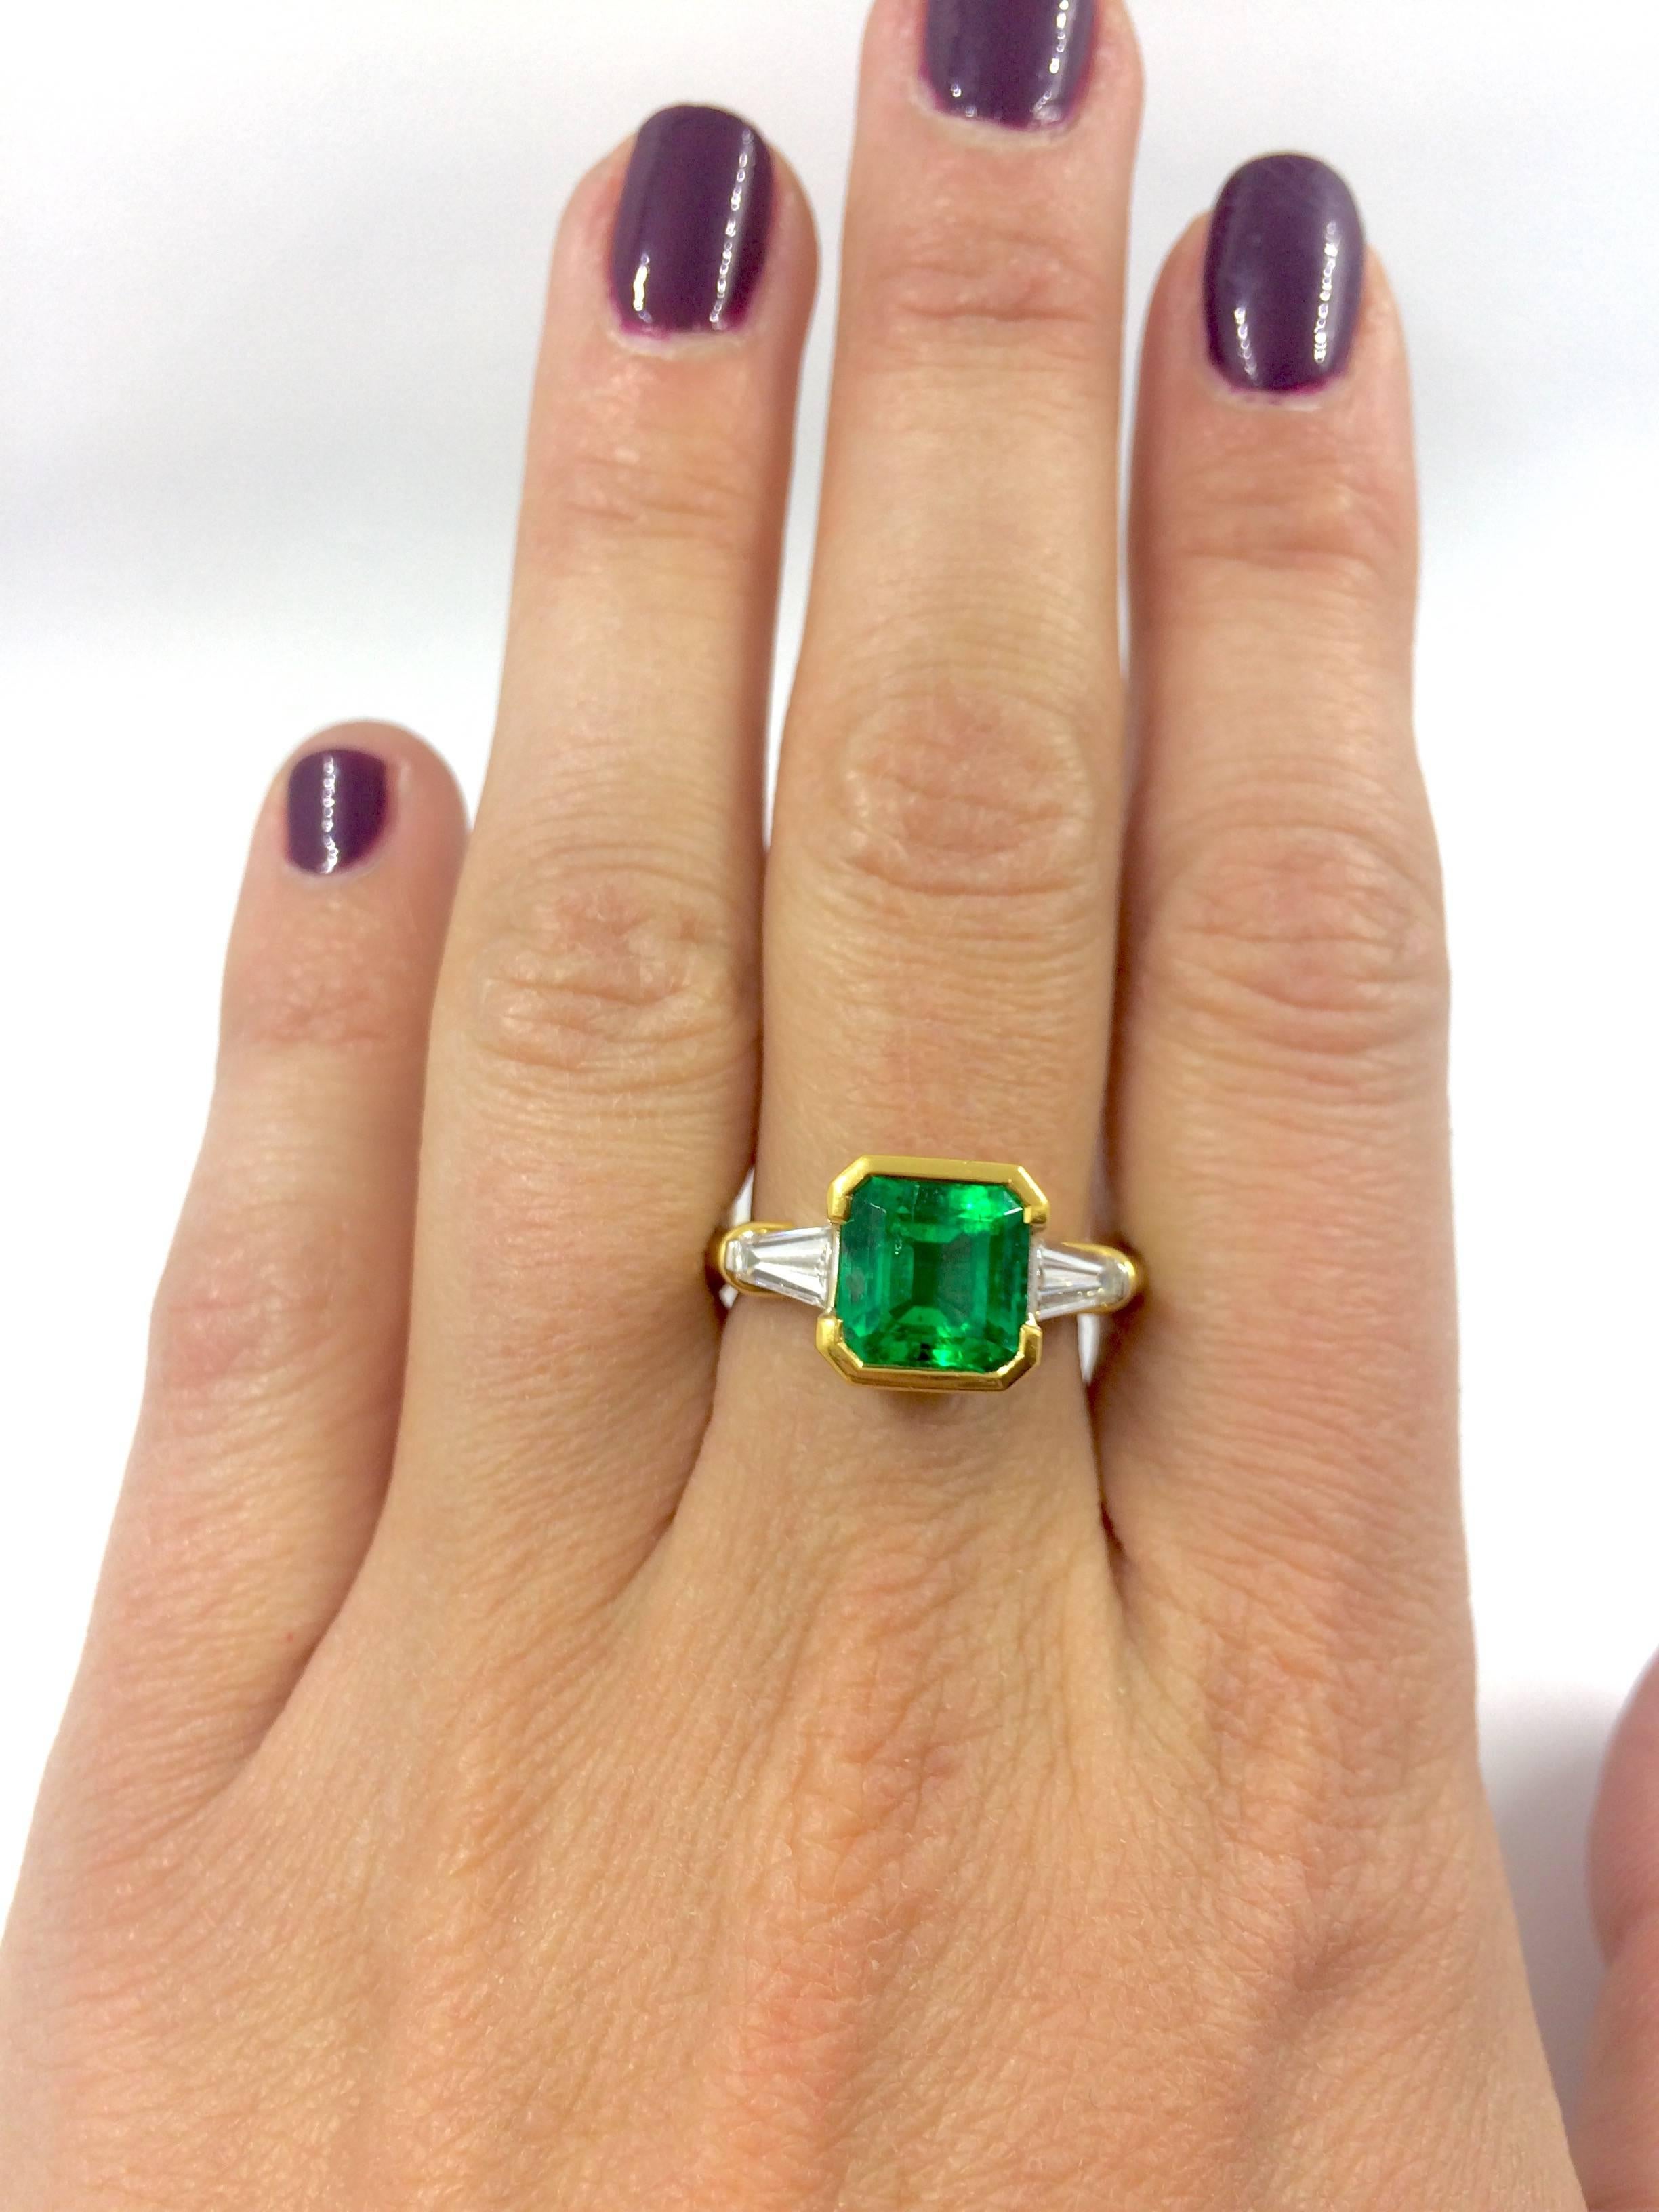 A white and yellow gold ring set in the middle with a stunning colombian square cut emerald, surrounded by a trapeze cut diamond on each side.
Under the emerald there is a brilliant cut diamond set on each side.
The ring is a unique creation